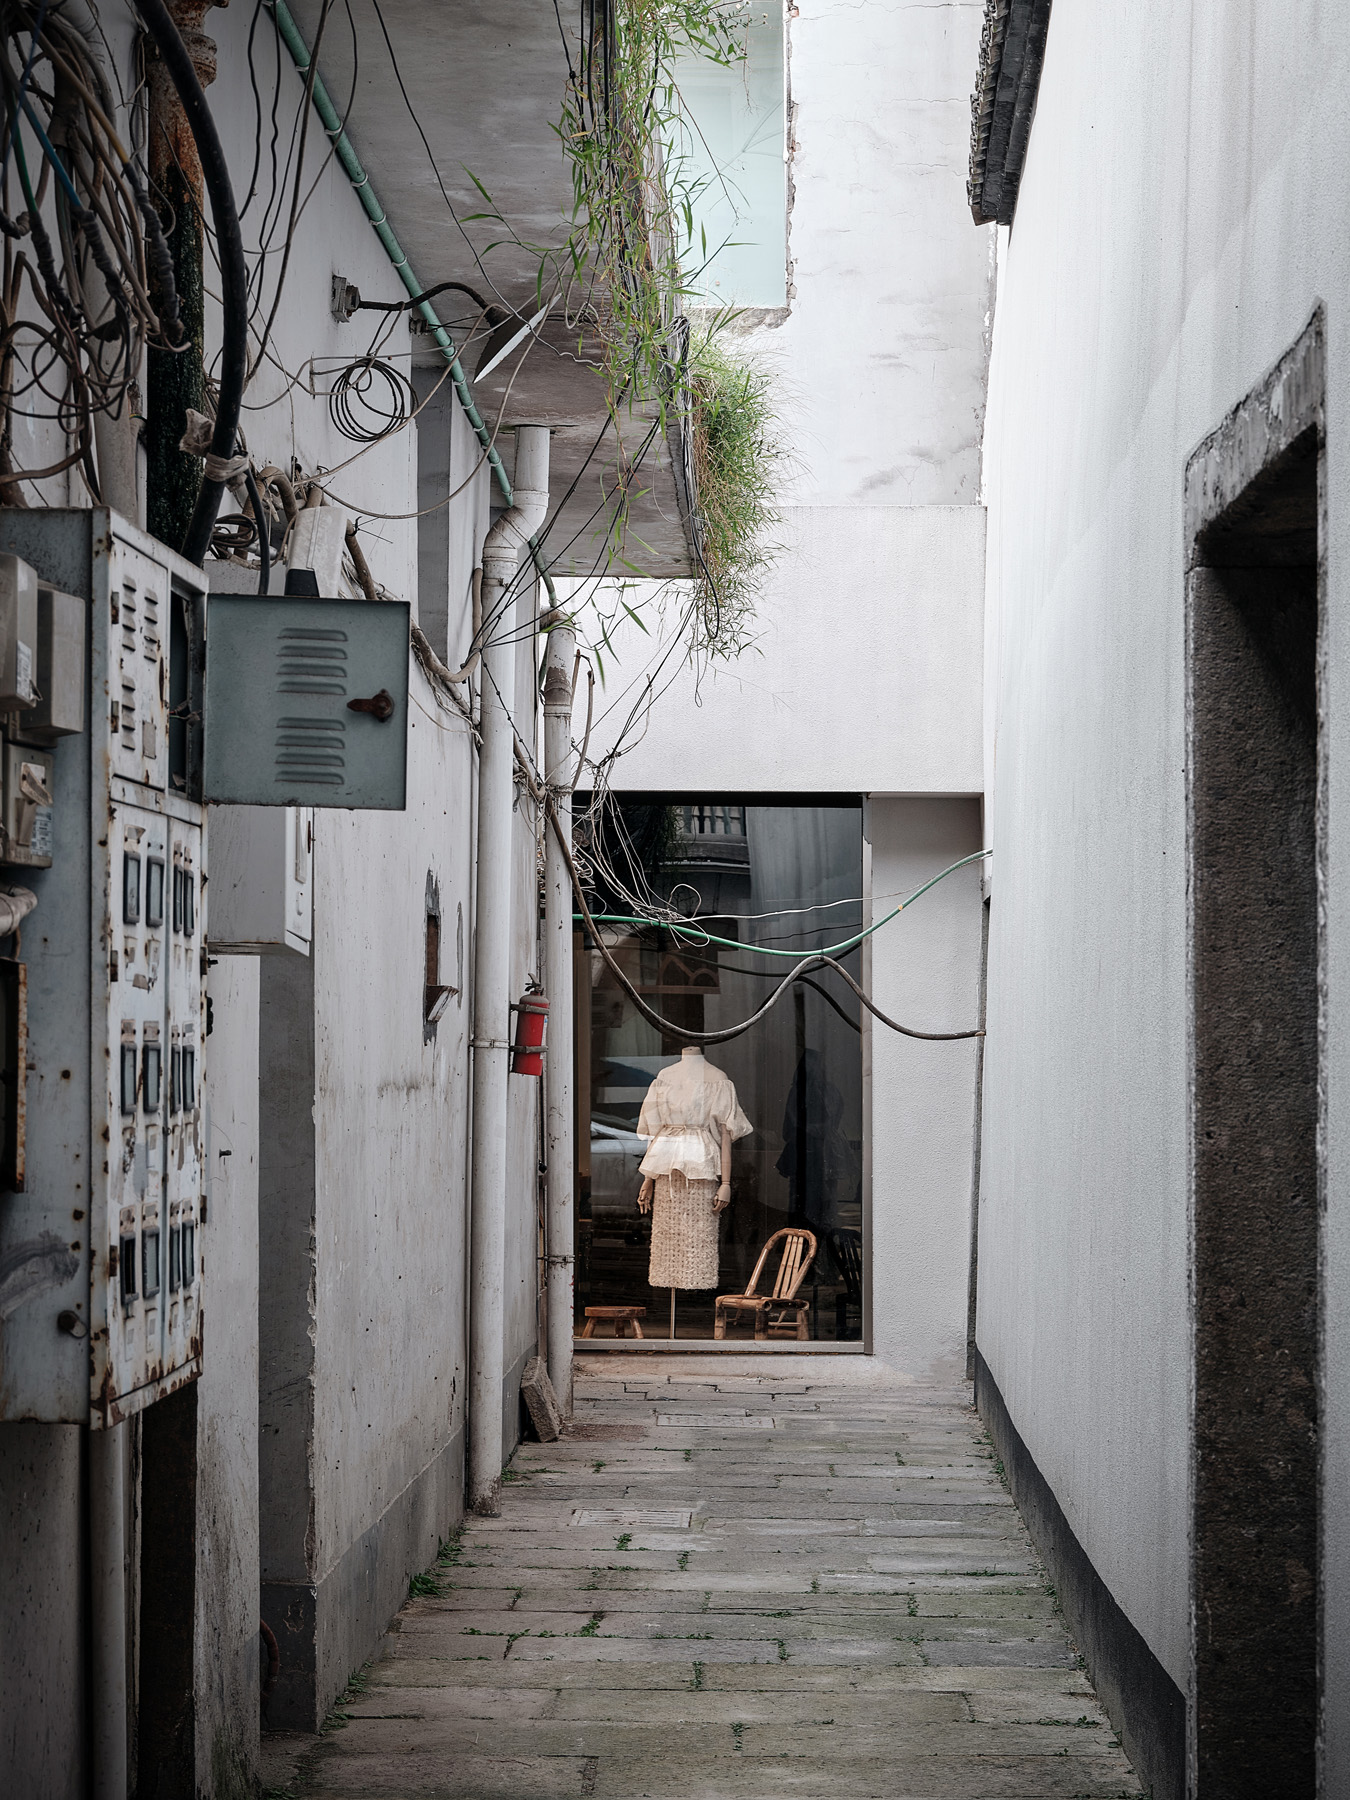 SCENERY ALLEY | Hangzhou Becó295 select store and creative space, by TEAM_BLDG, China 17